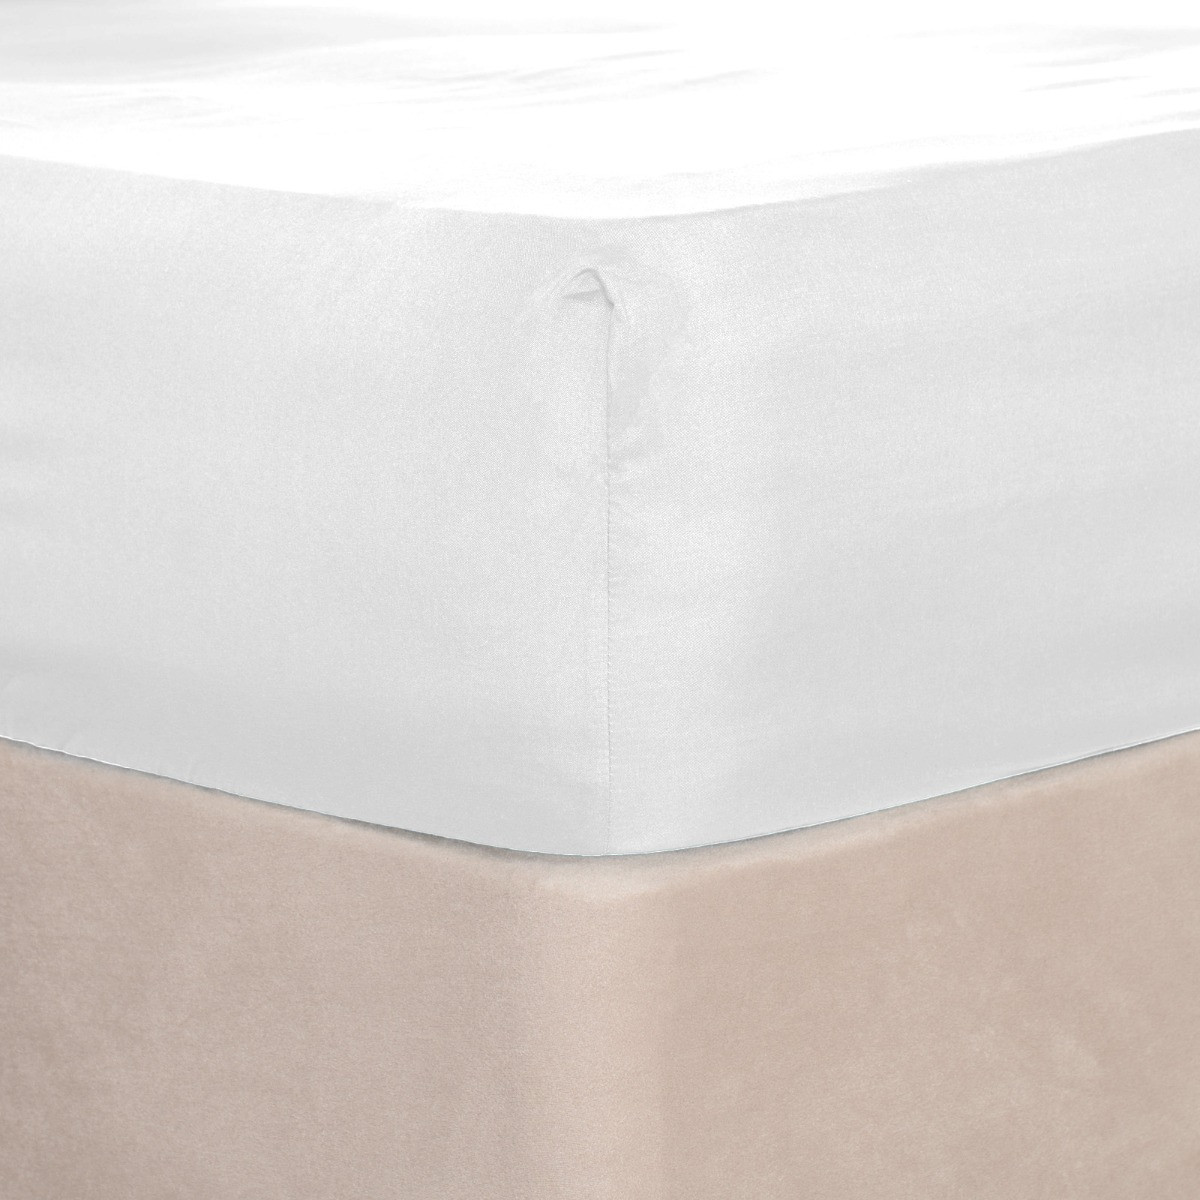 Brentfords Plain Dye Bed Fitted Sheet Soft Microfibre - White - Superking Size>